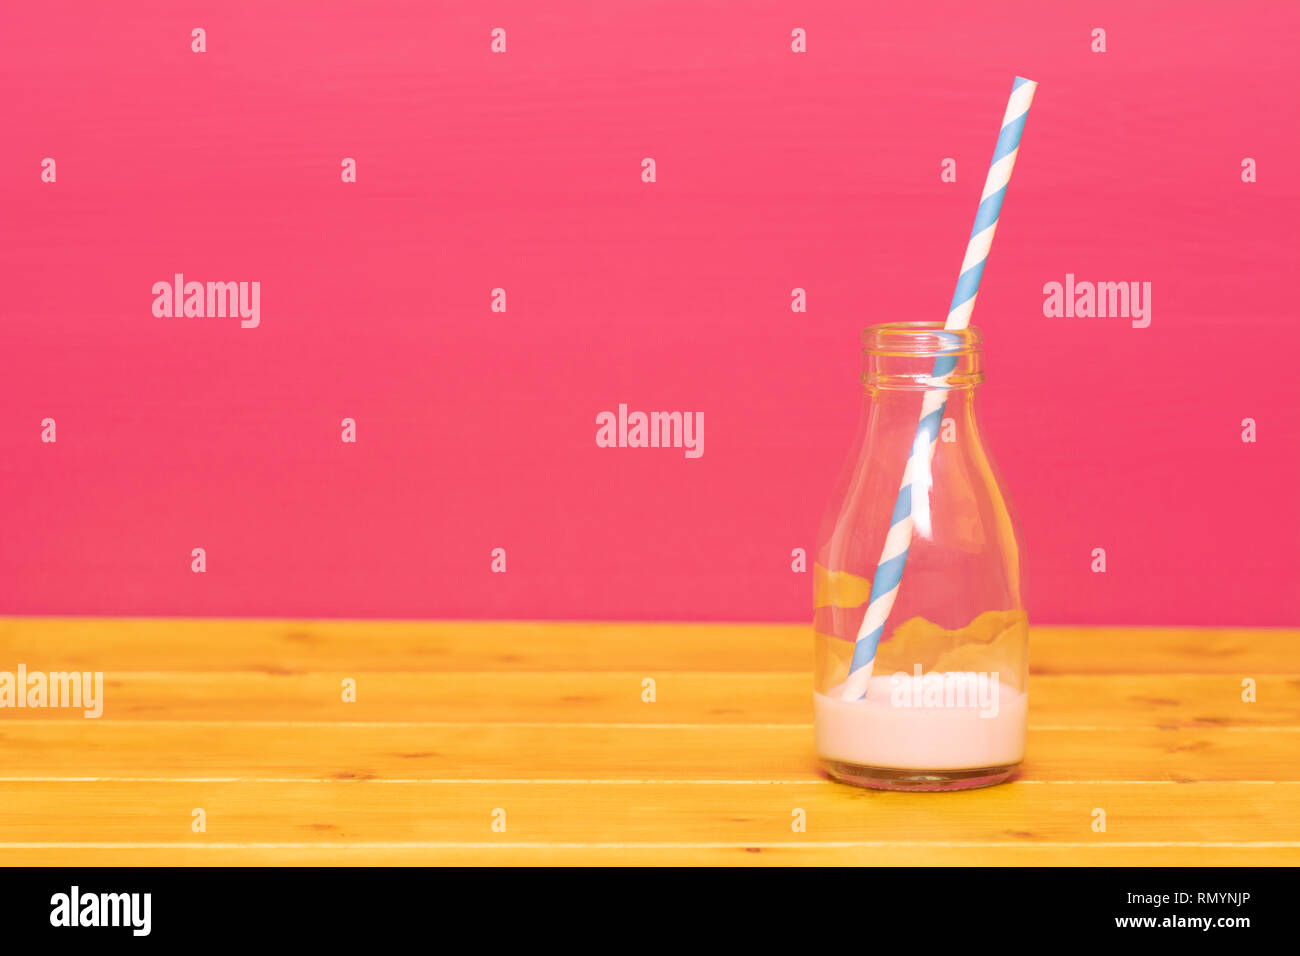 One-third pint glass milk bottle with dregs of strawberry milkshake and a retro paper straw, on a wooden table against a pink background Stock Photo